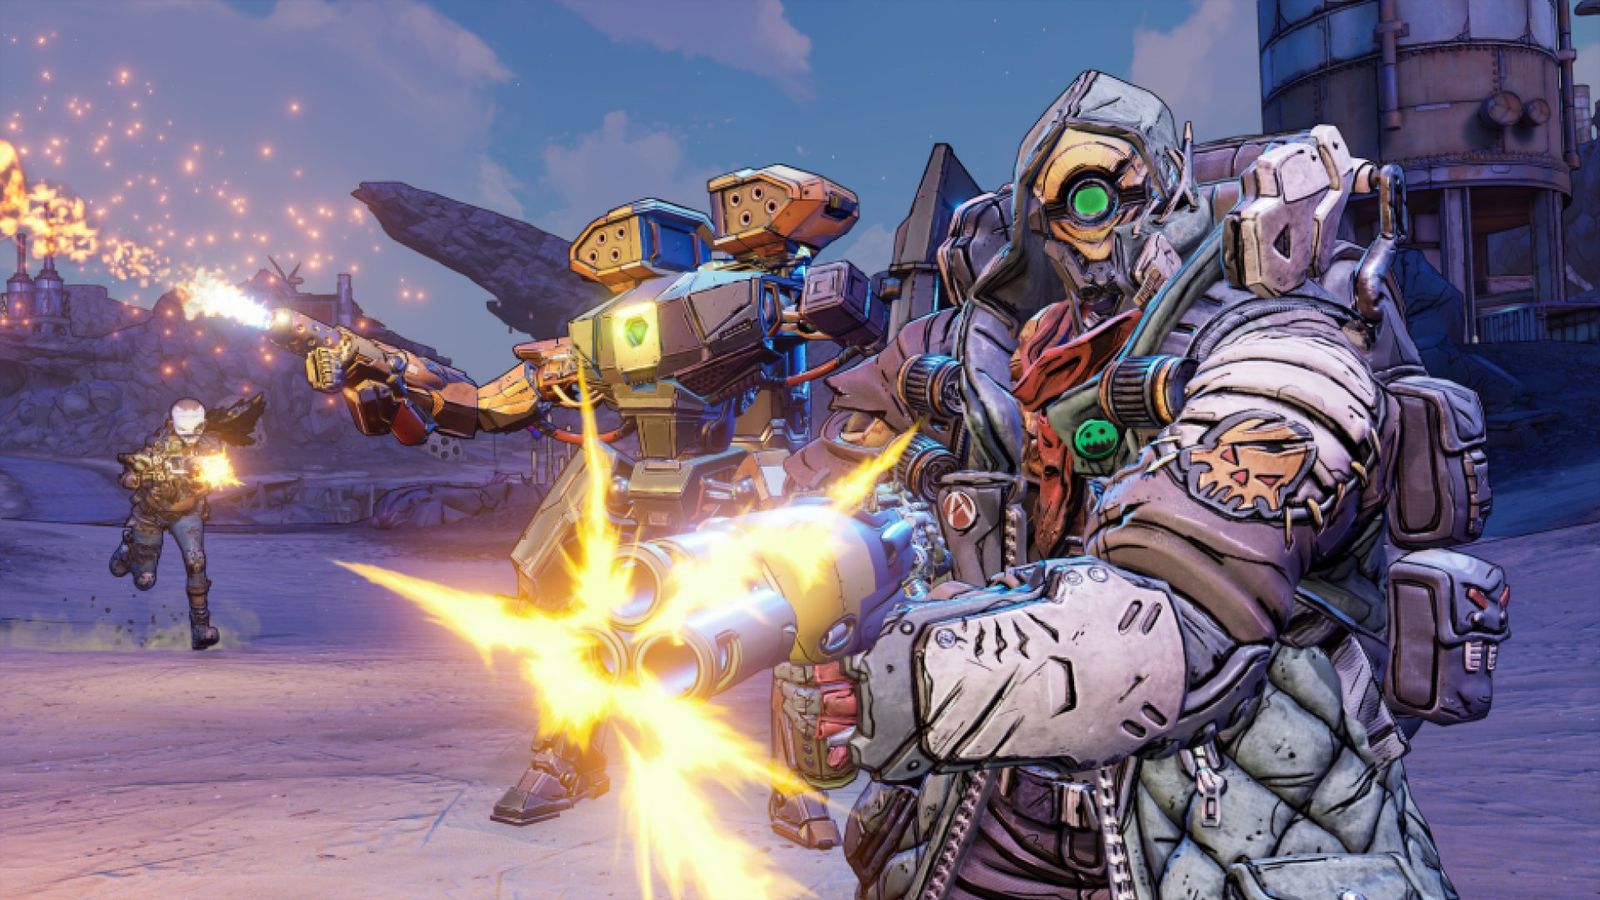 IN THE CUT -- Borderlands 3 Director's Cut DLC is right around the corner.